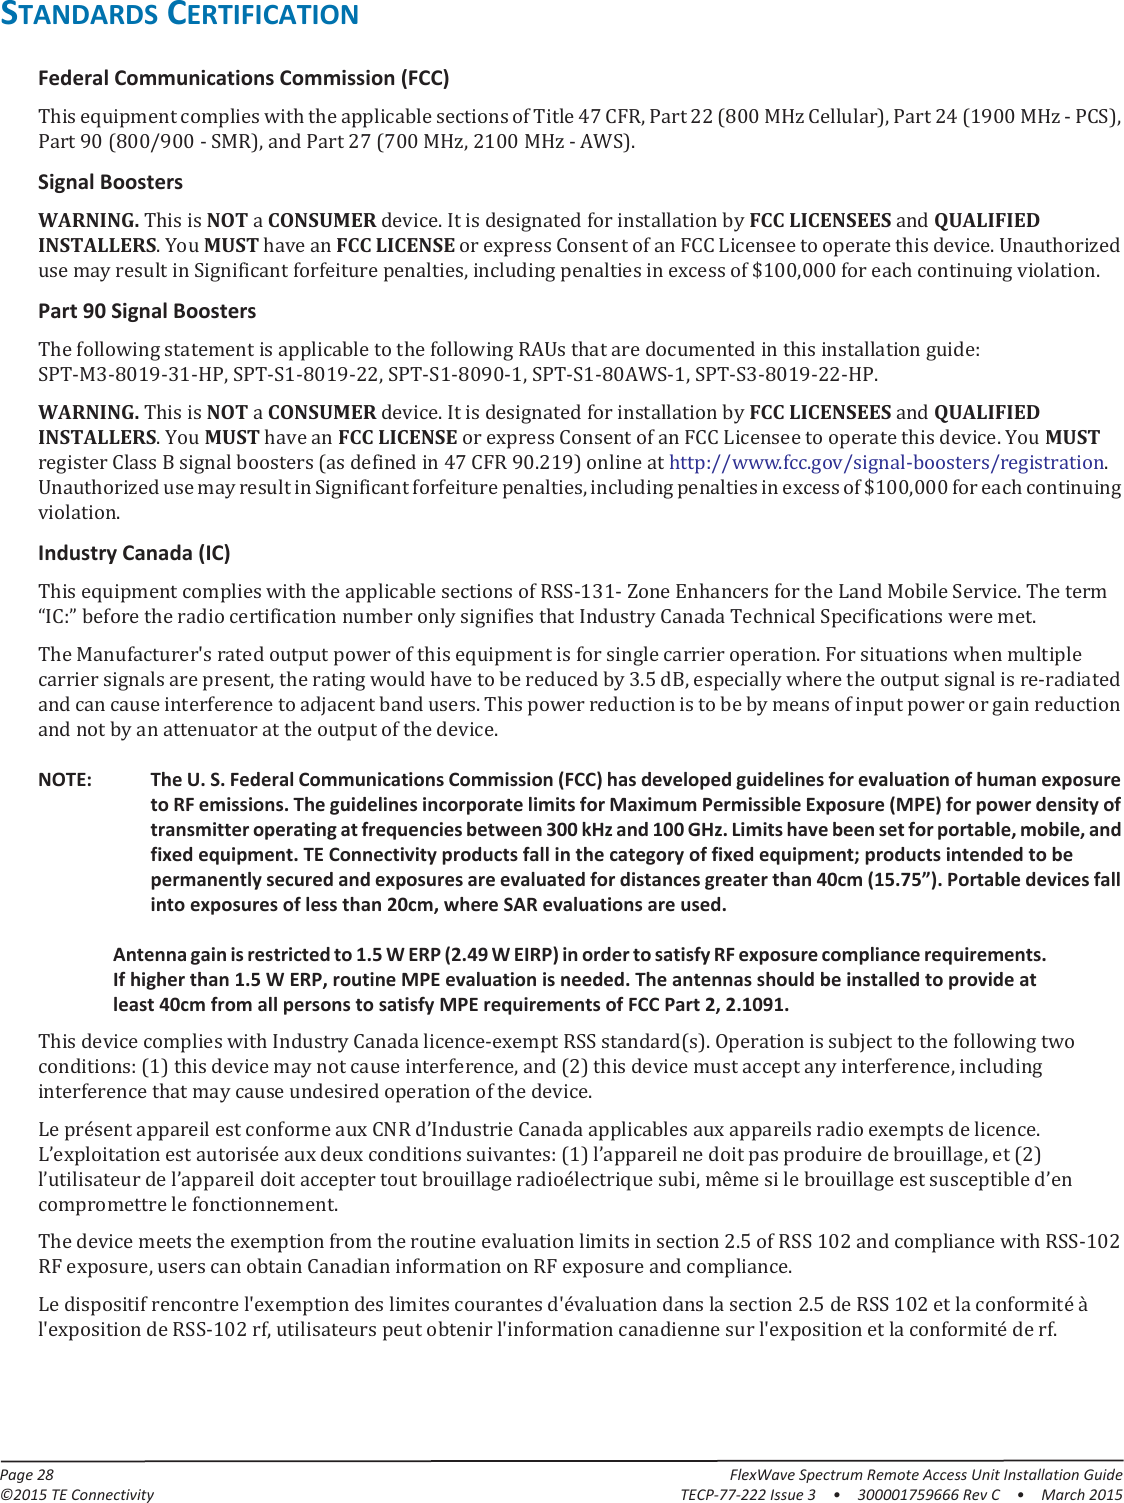 Page 28 FlexWave Spectrum Remote Access Unit Installation Guide©2015 TE Connectivity TECP-77-222 Issue 3  •  300001759666 Rev C  • March 2015STANDARDS CERTIFICATIONFederal Communications Commission (FCC) This equipment complies with the applicable sections of Title 47 CFR, Part 22 (800 MHz Cellular), Part 24 (1900 MHz - PCS), Part 90 (800/900 - SMR), and Part 27 (700 MHz, 2100 MHz - AWS).Signal BoostersWARNING. This is NOT a CONSUMER device. It is designated for installation by FCC LICENSEES and QUALIFIED INSTALLERS. You MUST have an FCC LICENSE or express Consent of an FCC Licensee to operate this device. Unauthorized use may result in Significant forfeiture penalties, including penalties in excess of $100,000 for each continuing violation.Part 90 Signal BoostersThe following statement is applicable to the following RAUs that are documented in this installation guide: SPT-M3-8019-31-HP, SPT-S1-8019-22, SPT-S1-8090-1, SPT-S1-80AWS-1, SPT-S3-8019-22-HP.WARNING. This is NOT a CONSUMER device. It is designated for installation by FCC LICENSEES and QUALIFIED INSTALLERS. You MUST have an FCC LICENSE or express Consent of an FCC Licensee to operate this device. You MUST register Class B signal boosters (as defined in 47 CFR 90.219) online at http://www.fcc.gov/signal-boosters/registration. Unauthorized use may result in Significant forfeiture penalties, including penalties in excess of $100,000 for each continuing violation.Industry Canada (IC)This equipment complies with the applicable sections of RSS-131- Zone Enhancers for the Land Mobile Service. The term “IC:” before the radio certification number only signifies that Industry Canada Technical Specifications were met.The Manufacturer&apos;s rated output power of this equipment is for single carrier operation. For situations when multiple carrier signals are present, the rating would have to be reduced by 3.5 dB, especially where the output signal is re-radiated and can cause interference to adjacent band users. This power reduction is to be by means of input power or gain reduction and not by an attenuator at the output of the device. NOTE: The U. S. Federal Communications Commission (FCC) has developed guidelines for evaluation of human exposure to RF emissions. The guidelines incorporate limits for Maximum Permissible Exposure (MPE) for power density of transmitter operating at frequencies between 300 kHz and 100 GHz. Limits have been set for portable, mobile, and fixed equipment. TE Connectivity products fall in the category of fixed equipment; products intended to be permanently secured and exposures are evaluated for distances greater than 40cm (15.75”). Portable devices fall into exposures of less than 20cm, where SAR evaluations are used. Antenna gain is restricted to 1.5 W ERP (2.49 W EIRP) in order to satisfy RF exposure compliance requirements. If higher than 1.5 W ERP, routine MPE evaluation is needed. The antennas should be installed to provide at least 40cm from all persons to satisfy MPE requirements of FCC Part 2, 2.1091. This device complies with Industry Canada licence-exempt RSS standard(s). Operation is subject to the following two conditions: (1) this device may not cause interference, and (2) this device must accept any interference, including interference that may cause undesired operation of the device.Le présent appareil est conforme aux CNR d’Industrie Canada applicables aux appareils radio exempts de licence. L’exploitation est autorisée aux deux conditions suivantes: (1) l’appareil ne doit pas produire de brouillage, et (2) l’utilisateur de l’appareil doit accepter tout brouillage radioélectrique subi, même si le brouillage est susceptible d’en compromettre le fonctionnement.The device meets the exemption from the routine evaluation limits in section 2.5 of RSS 102 and compliance with RSS-102 RF exposure, users can obtain Canadian information on RF exposure and compliance.Le dispositif rencontre l&apos;exemption des limites courantes d&apos;évaluation dans la section 2.5 de RSS 102 et la conformité à l&apos;exposition de RSS-102 rf, utilisateurs peut obtenir l&apos;information canadienne sur l&apos;exposition et la conformité de rf.